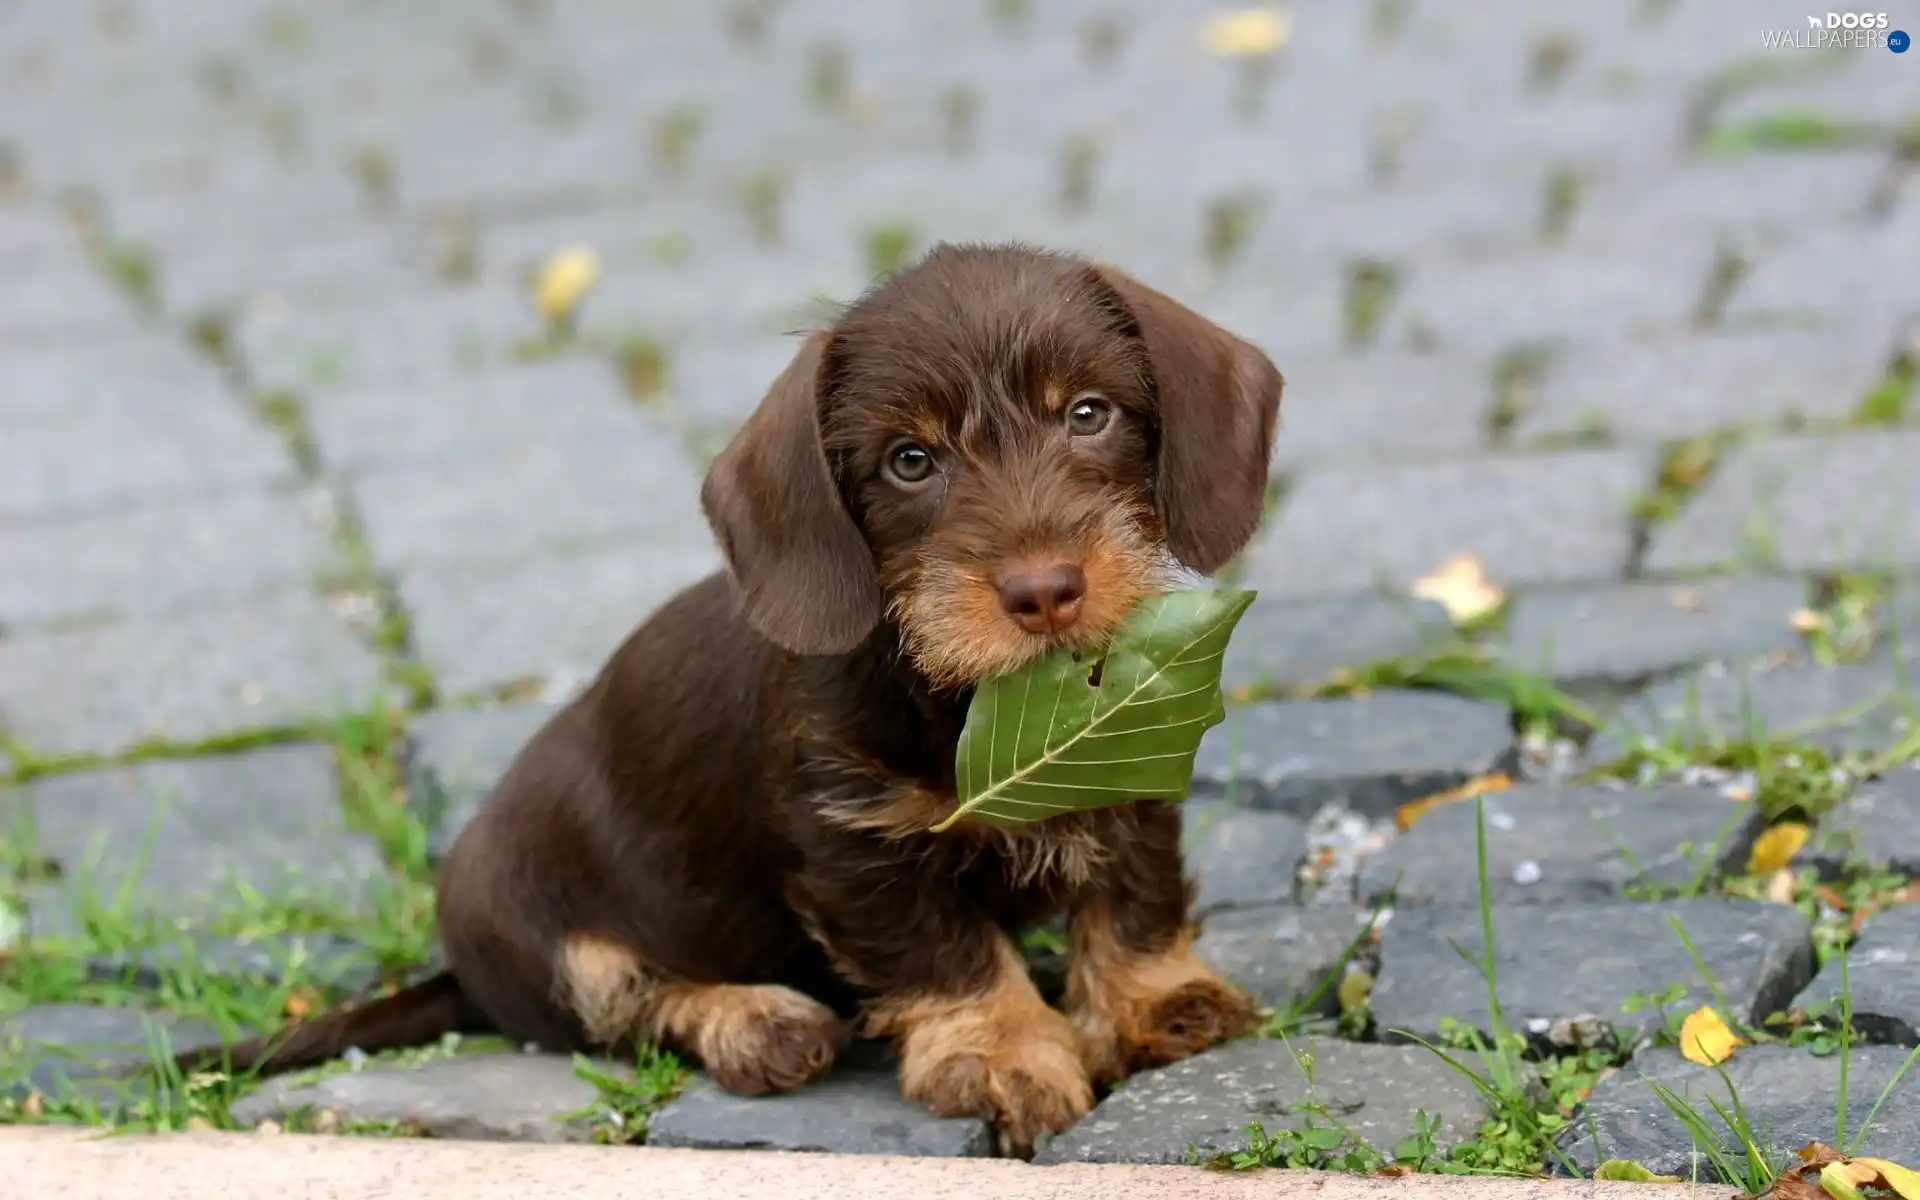 The look, Puppy, honeyed, Wirehaired Dachshund, doggy